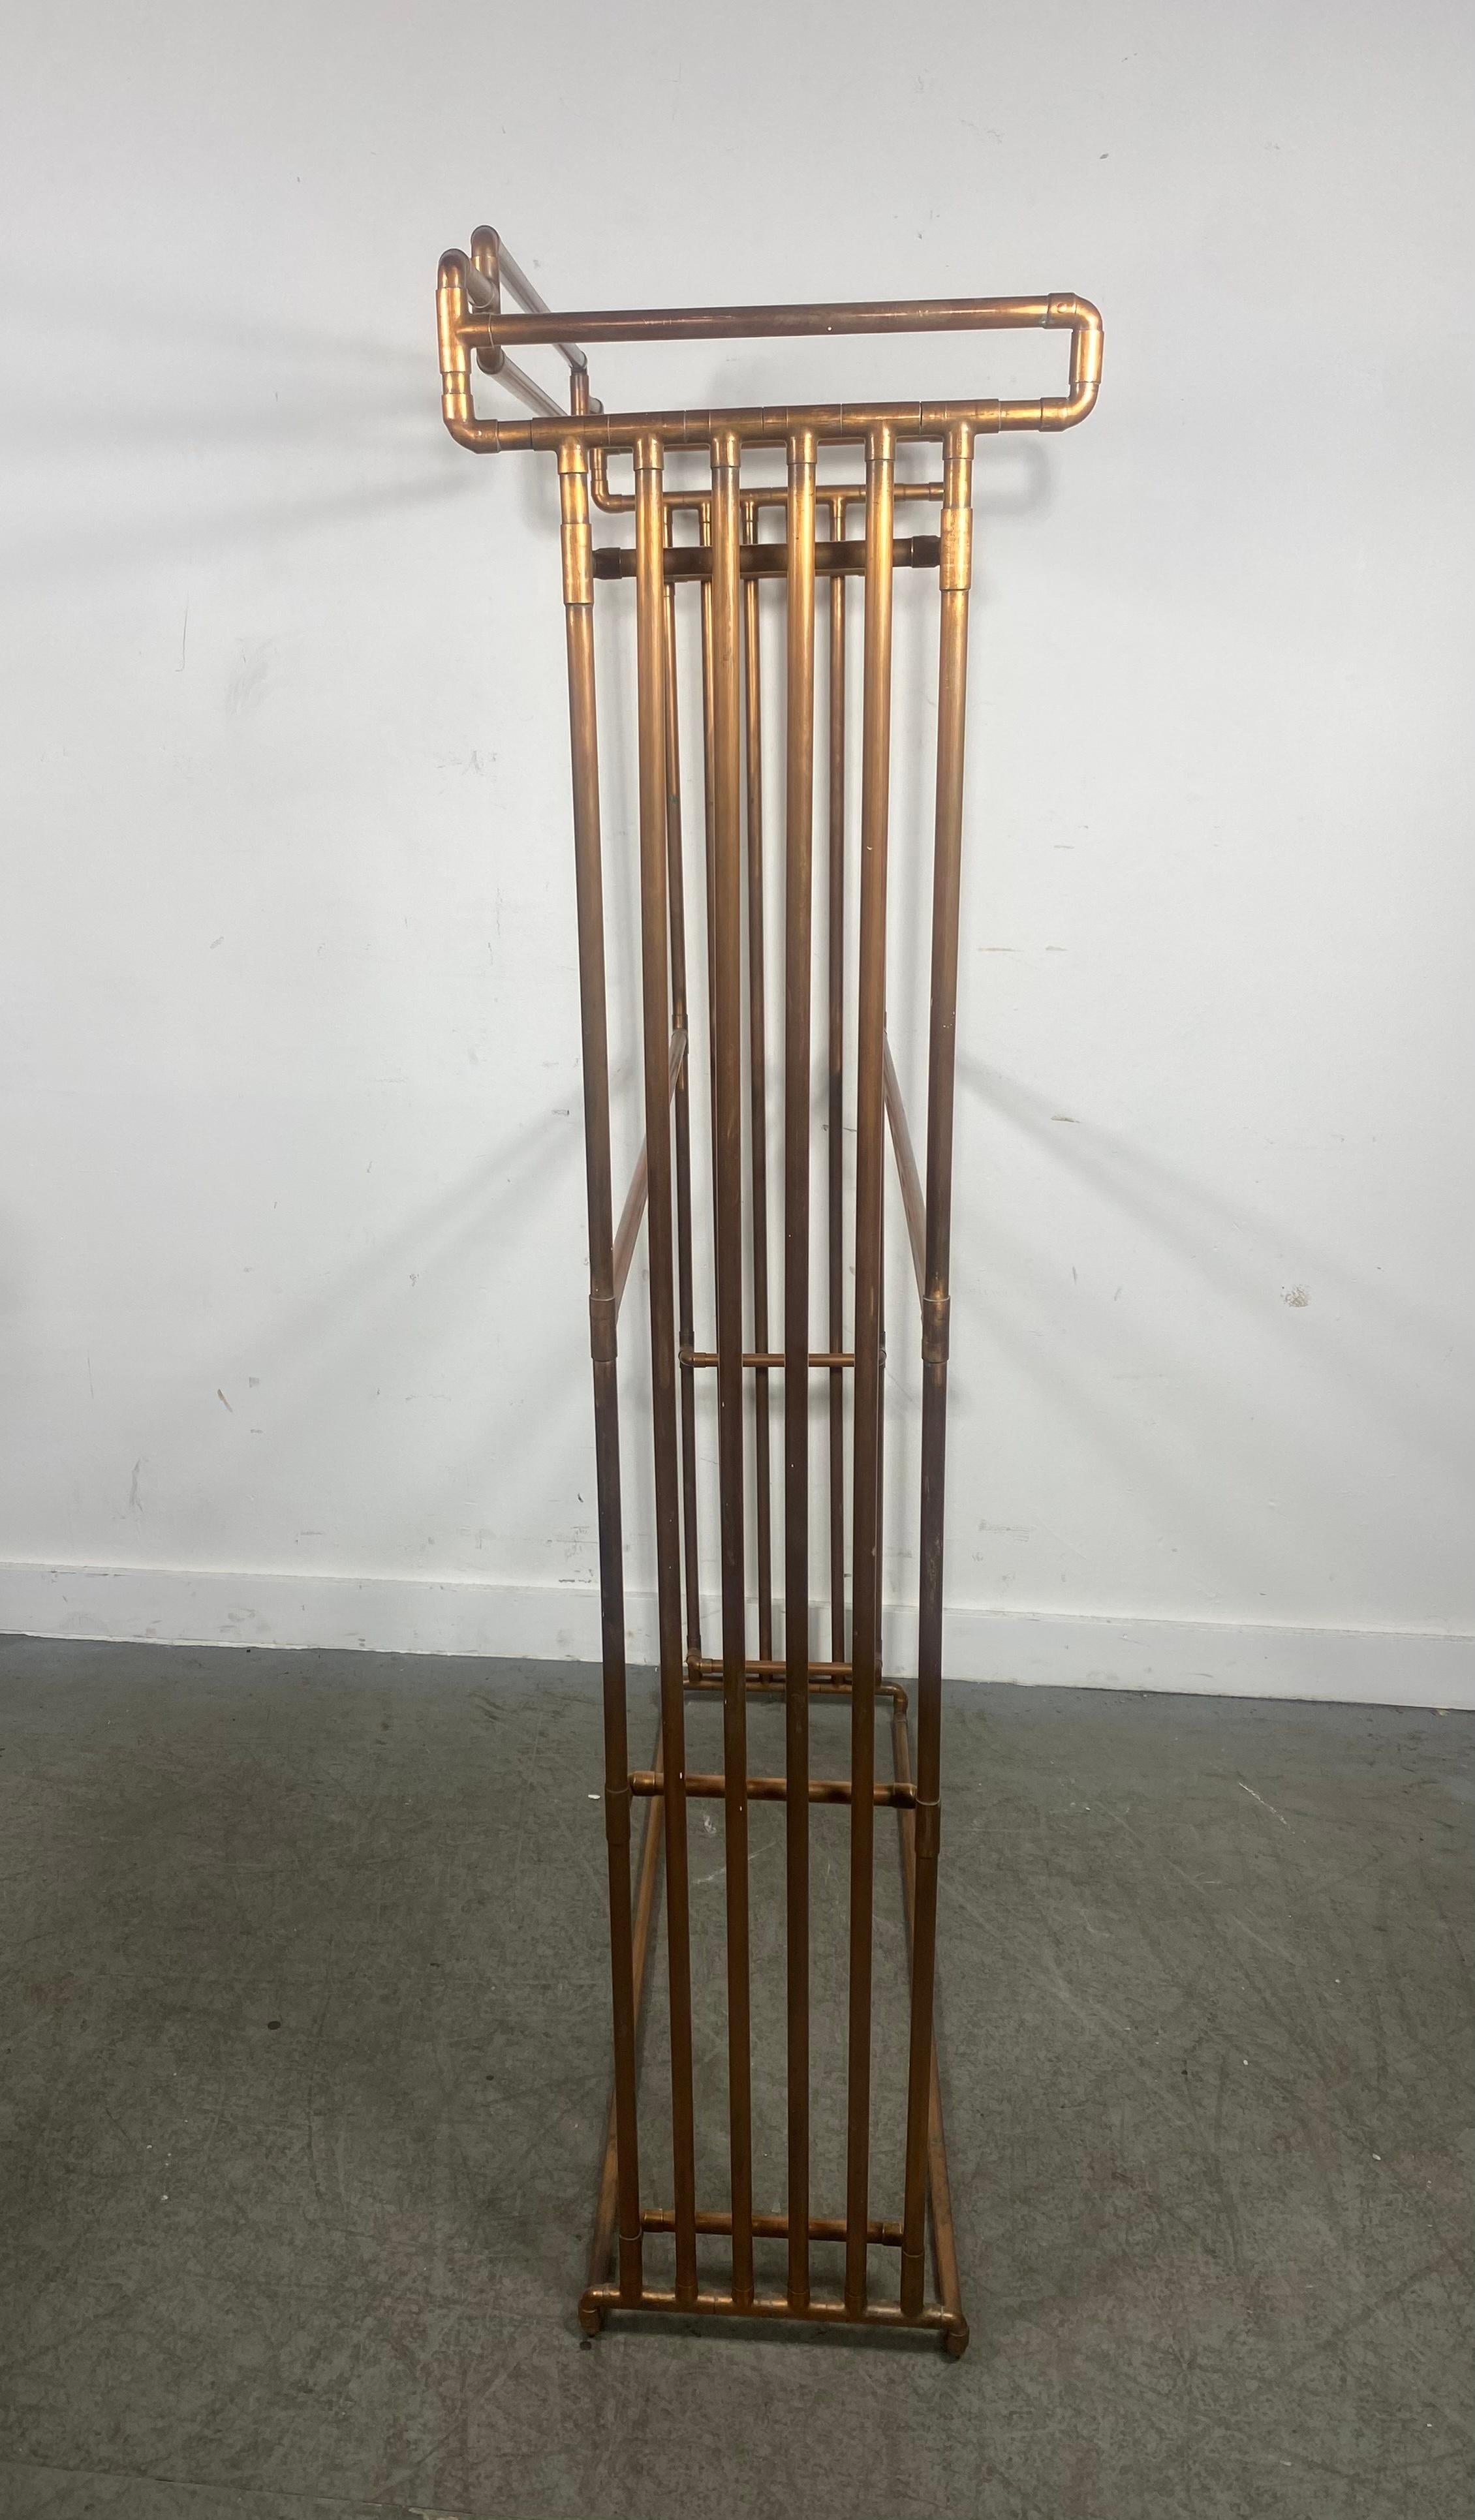 Sculpture Shelf in Copper Pipe by T J Volonis, Modernist / Architectural In Excellent Condition For Sale In Buffalo, NY